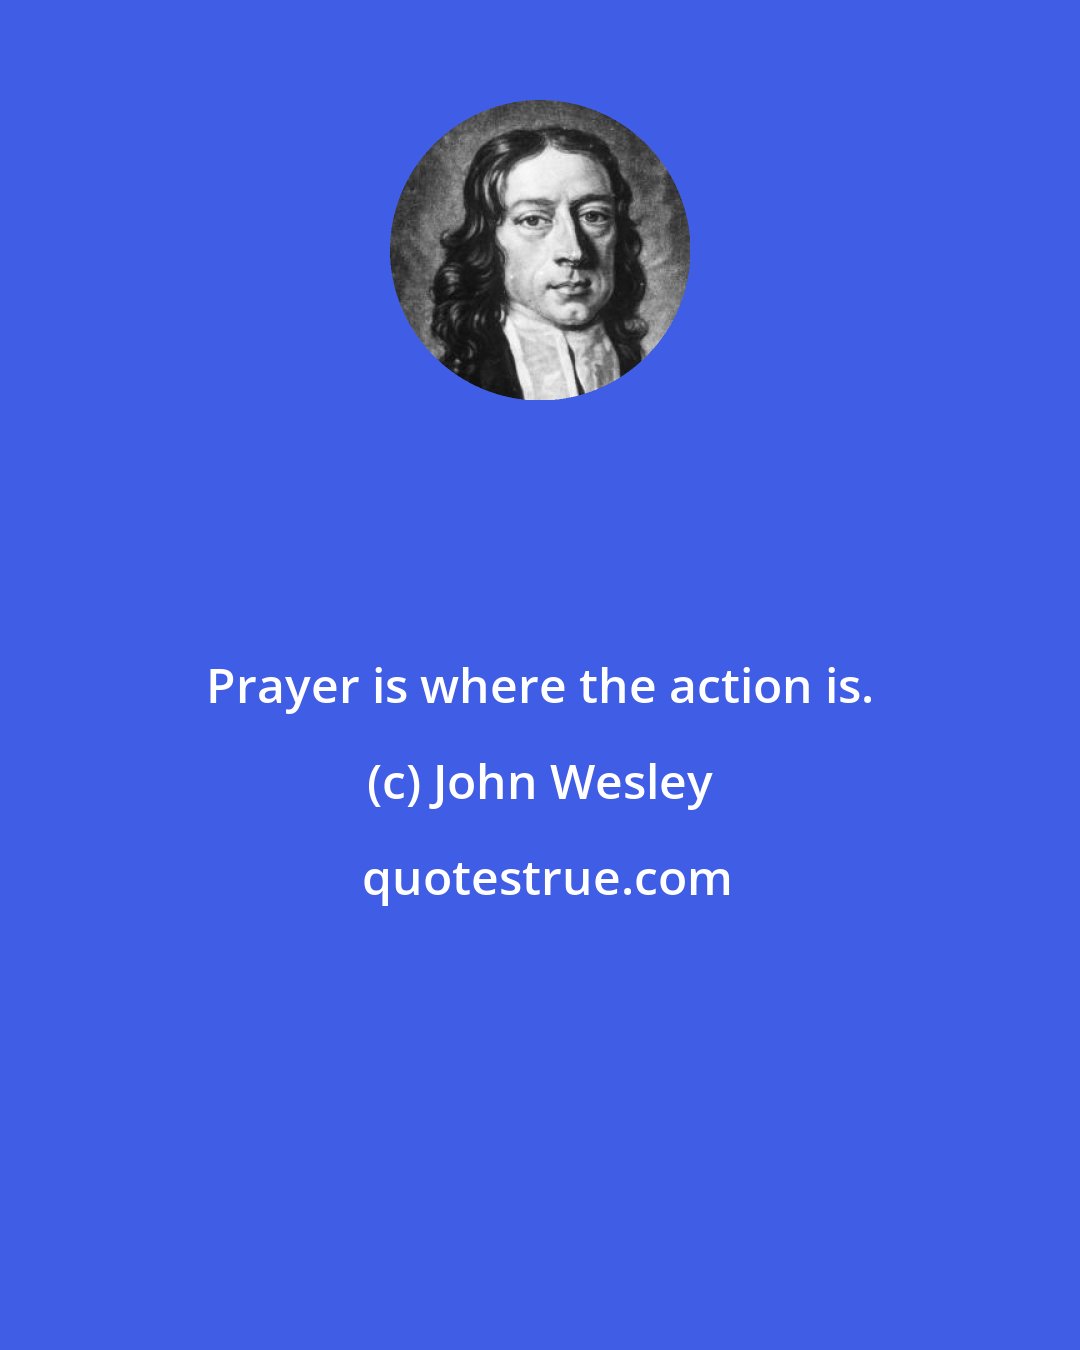 John Wesley: Prayer is where the action is.